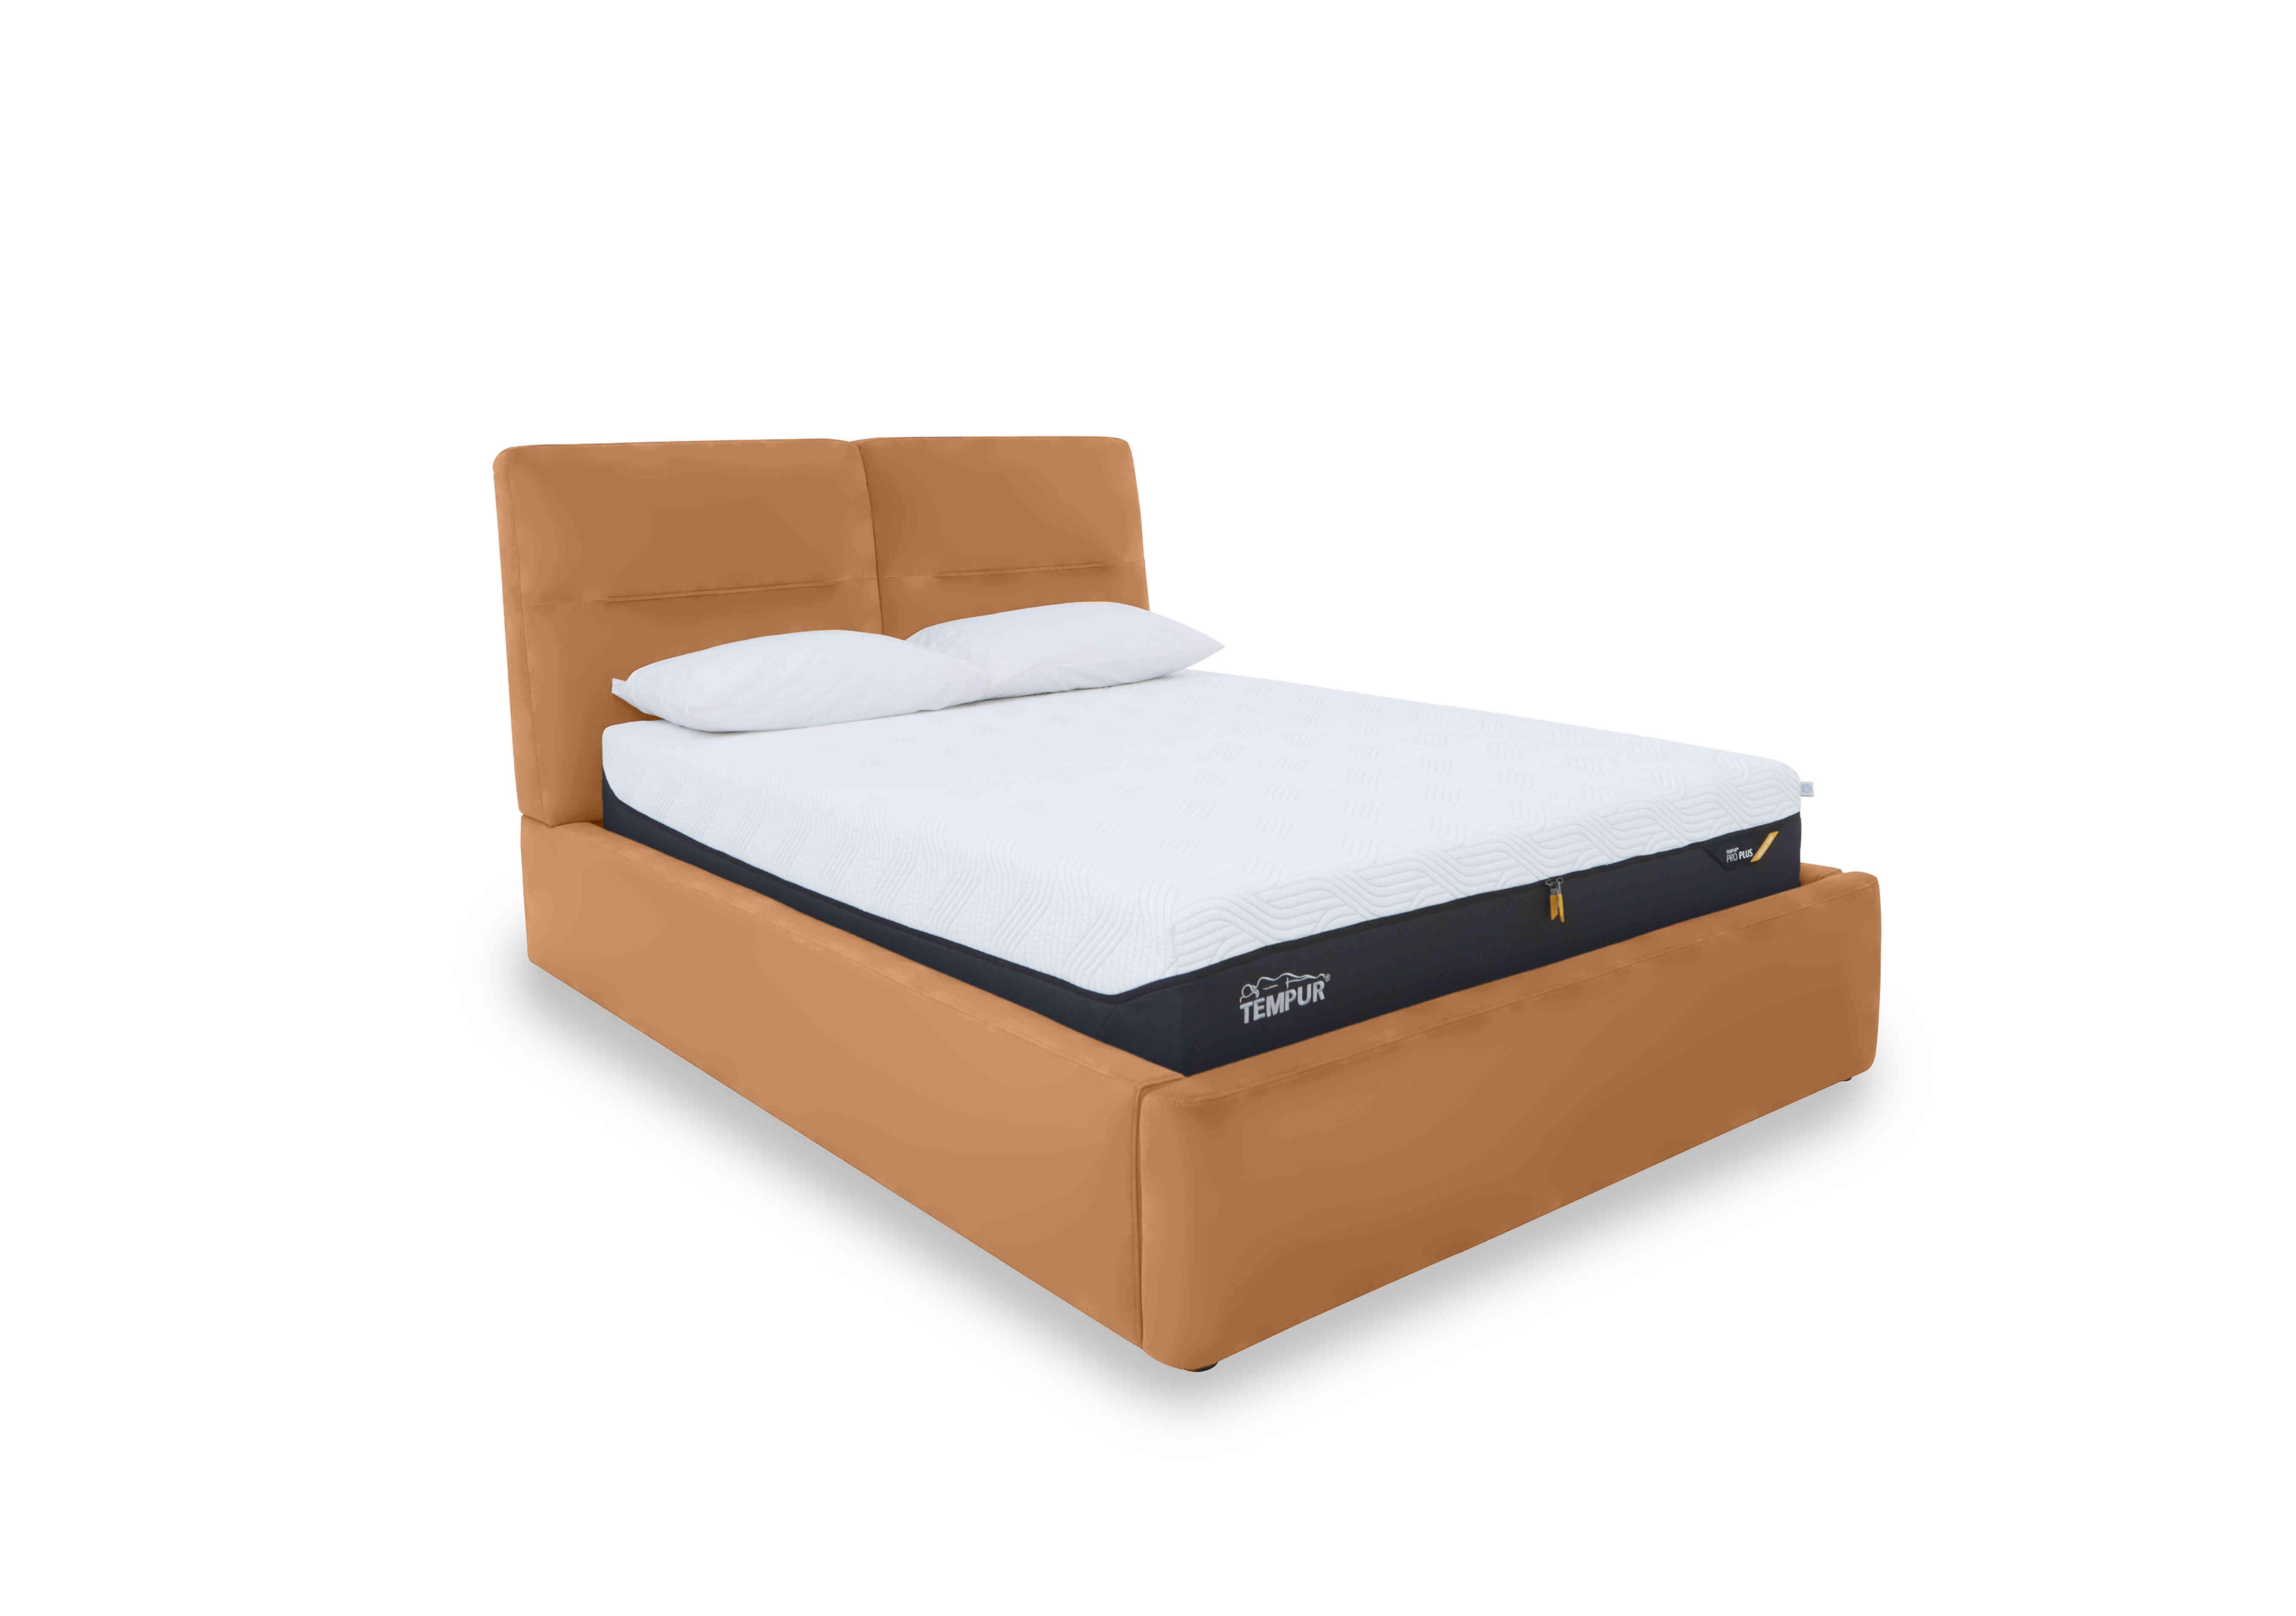 Stark Leather Manual Ottoman Bed Frame in Bv-335e Honey Yellow on Furniture Village